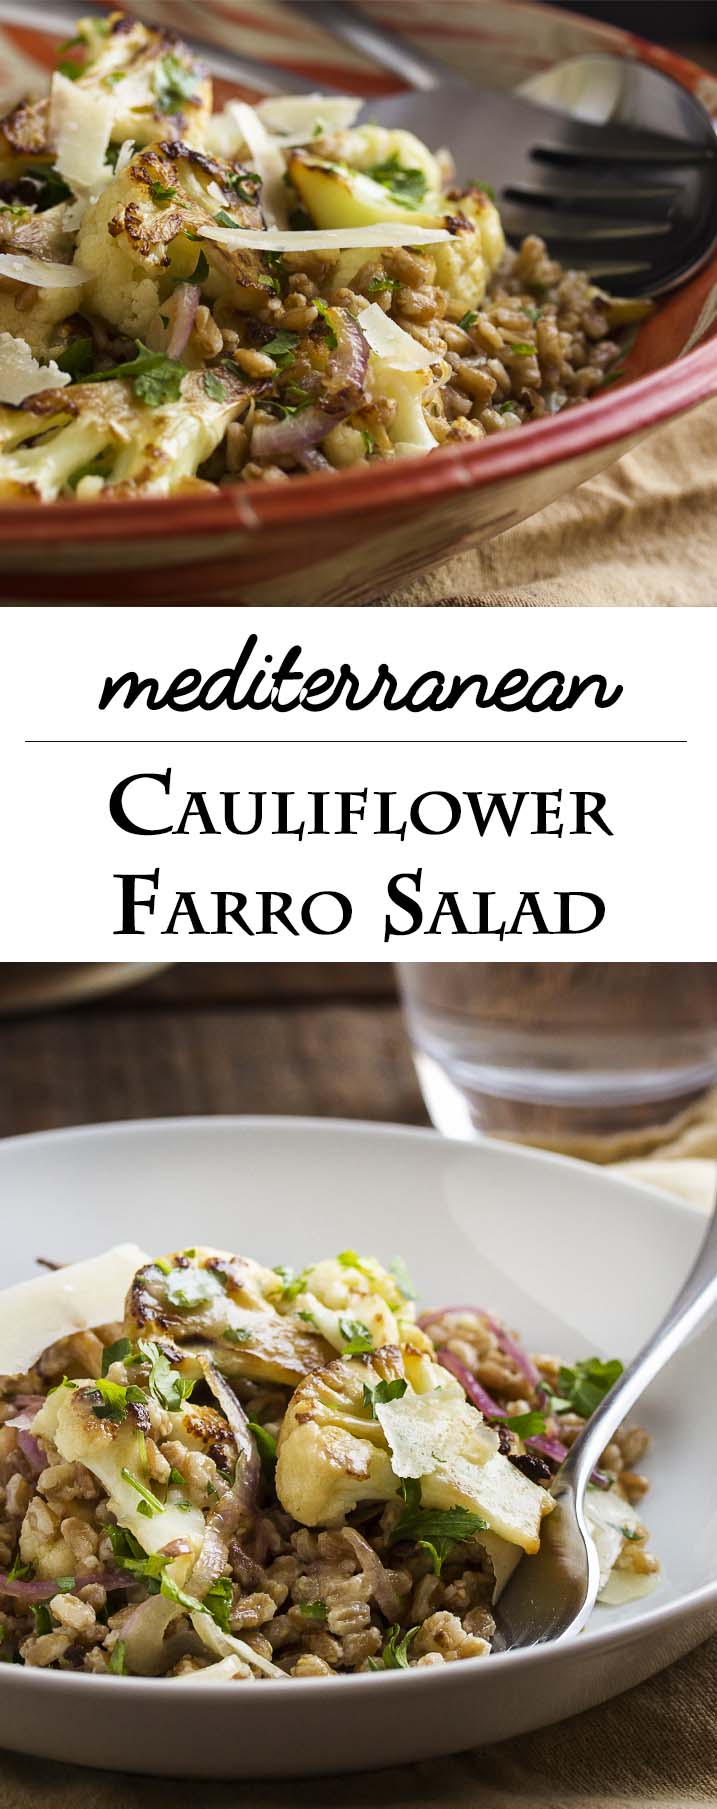 This warm Mediterranean farro salad is tossed with pan roasted cauliflower and creamy tahini lemon dressing to make a great winter salad. | justalittlebitofbacon.com